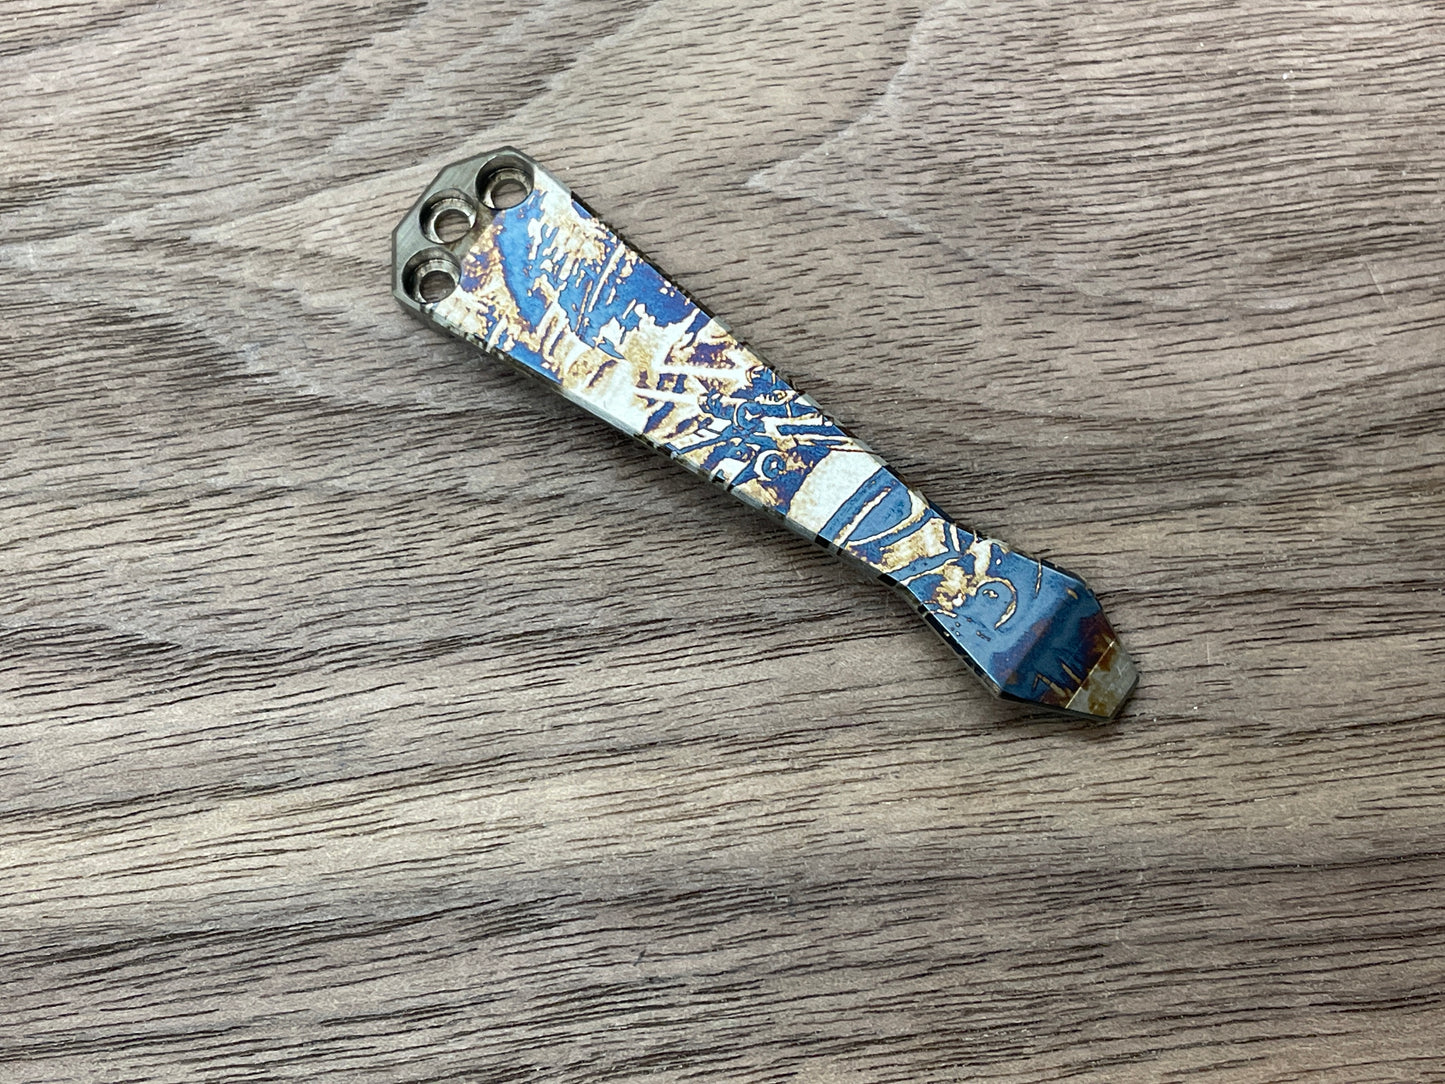 STAR WARS heat ano Dmd Titanium CLIP for most Benchmade models